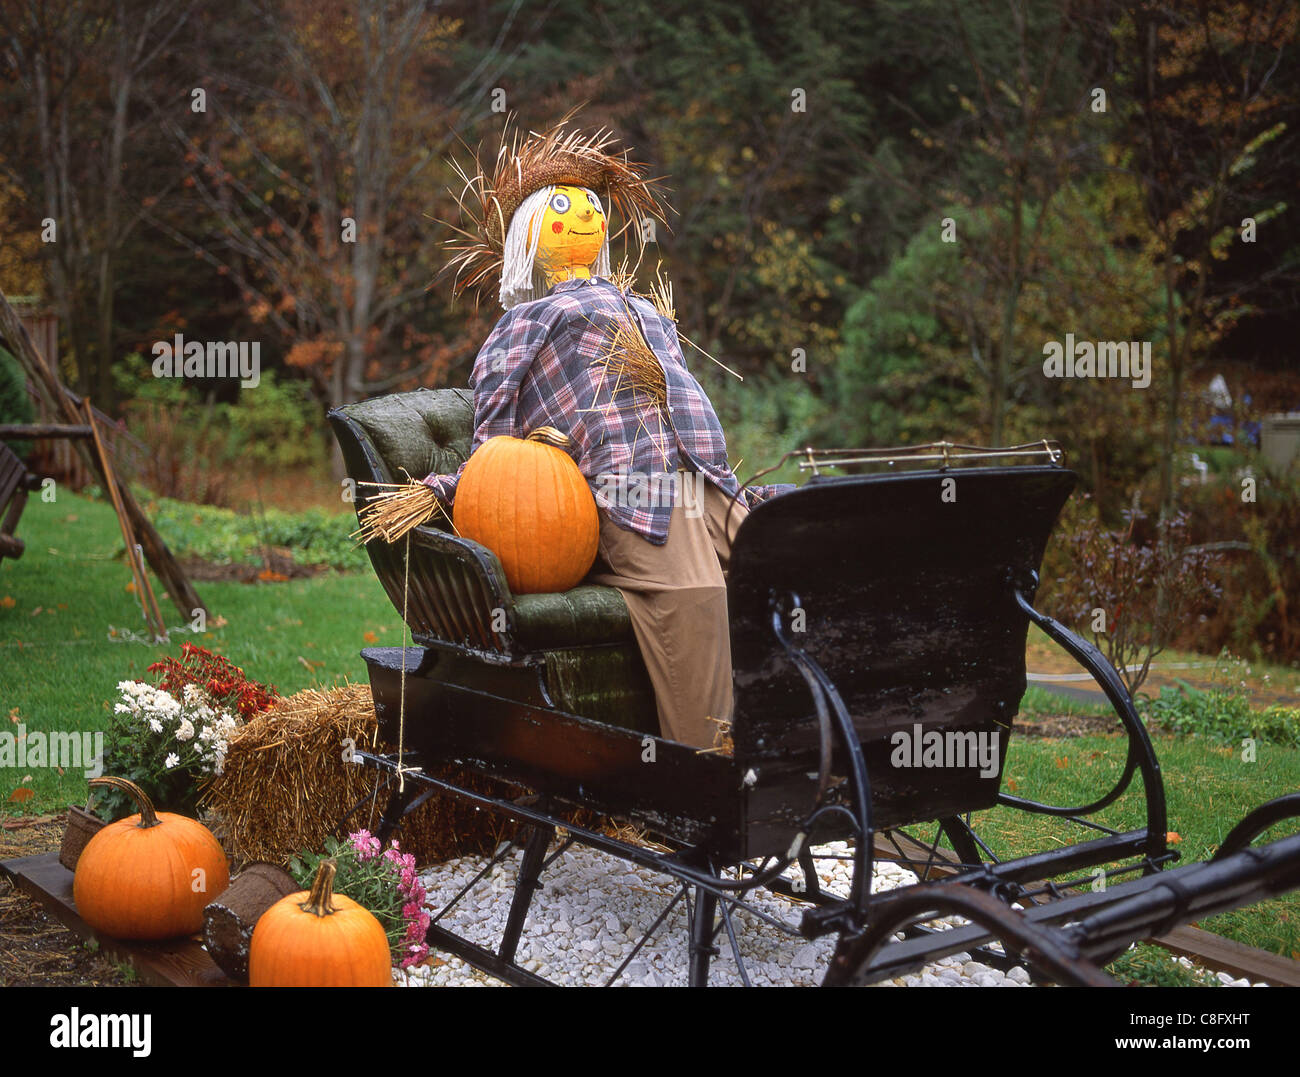 Roadside Halloween display with pumpkins and scarecrow, Connecticut, United States of America Stock Photo